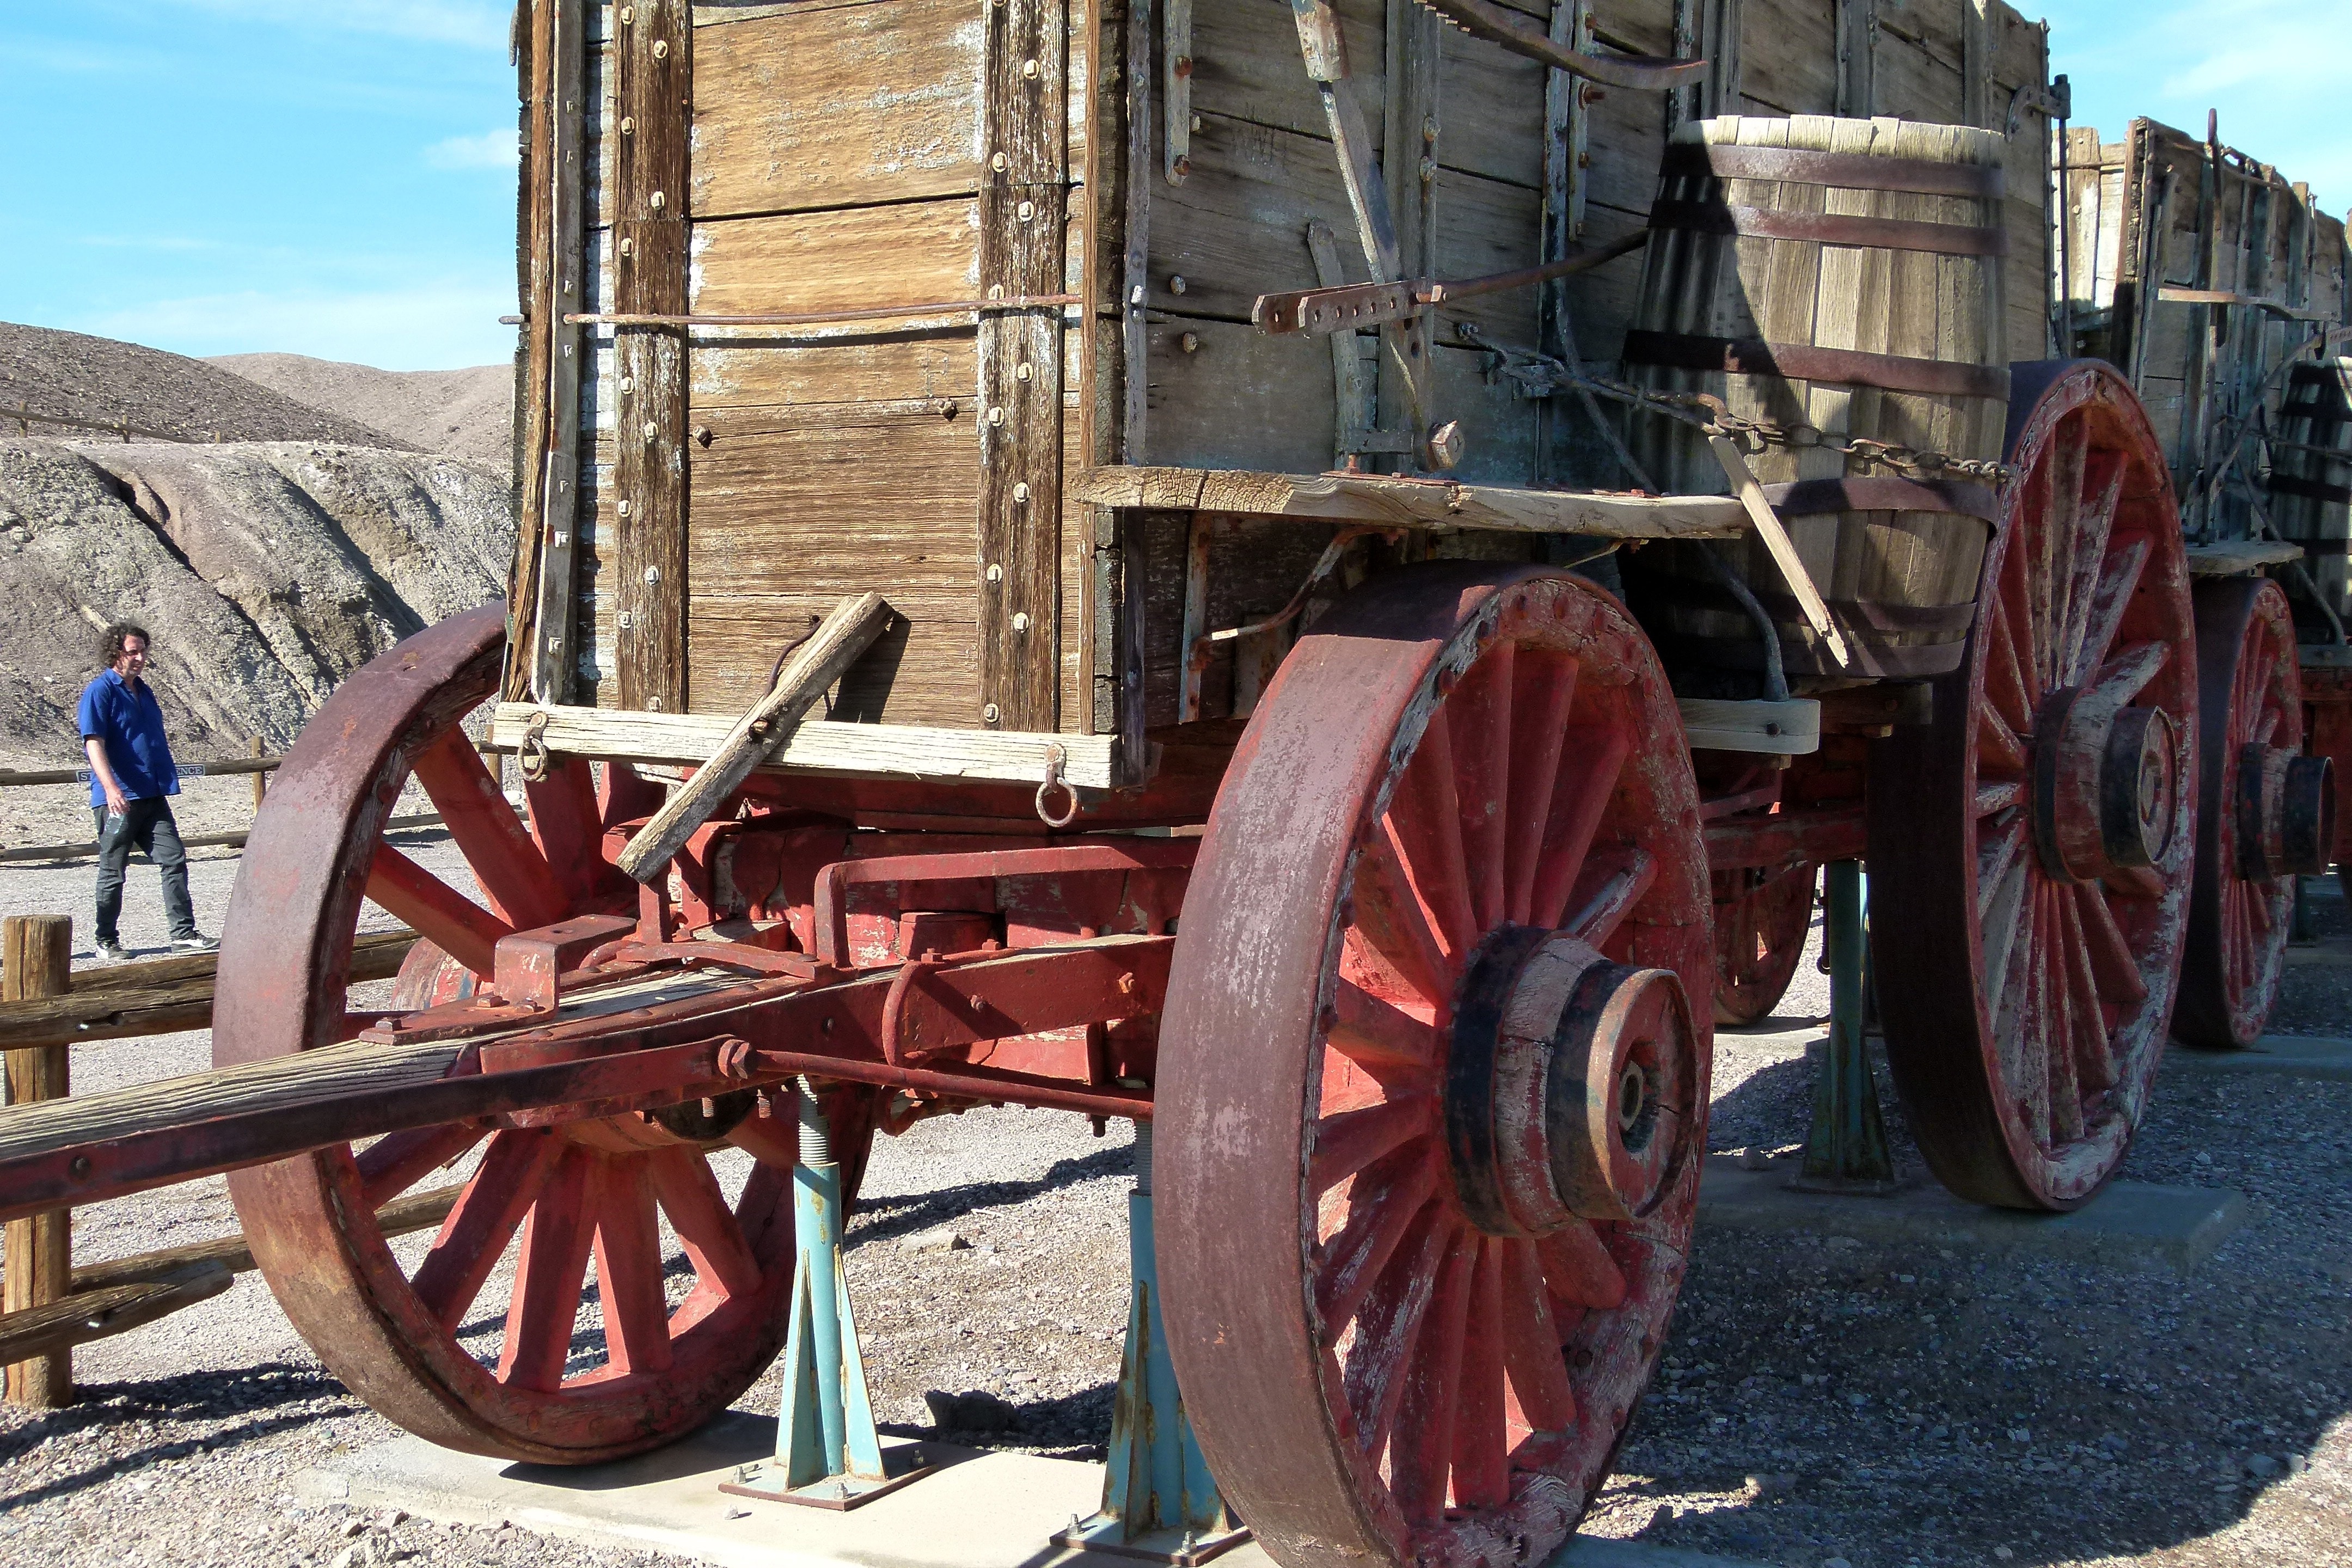 capture image of wheeled wagons during day time